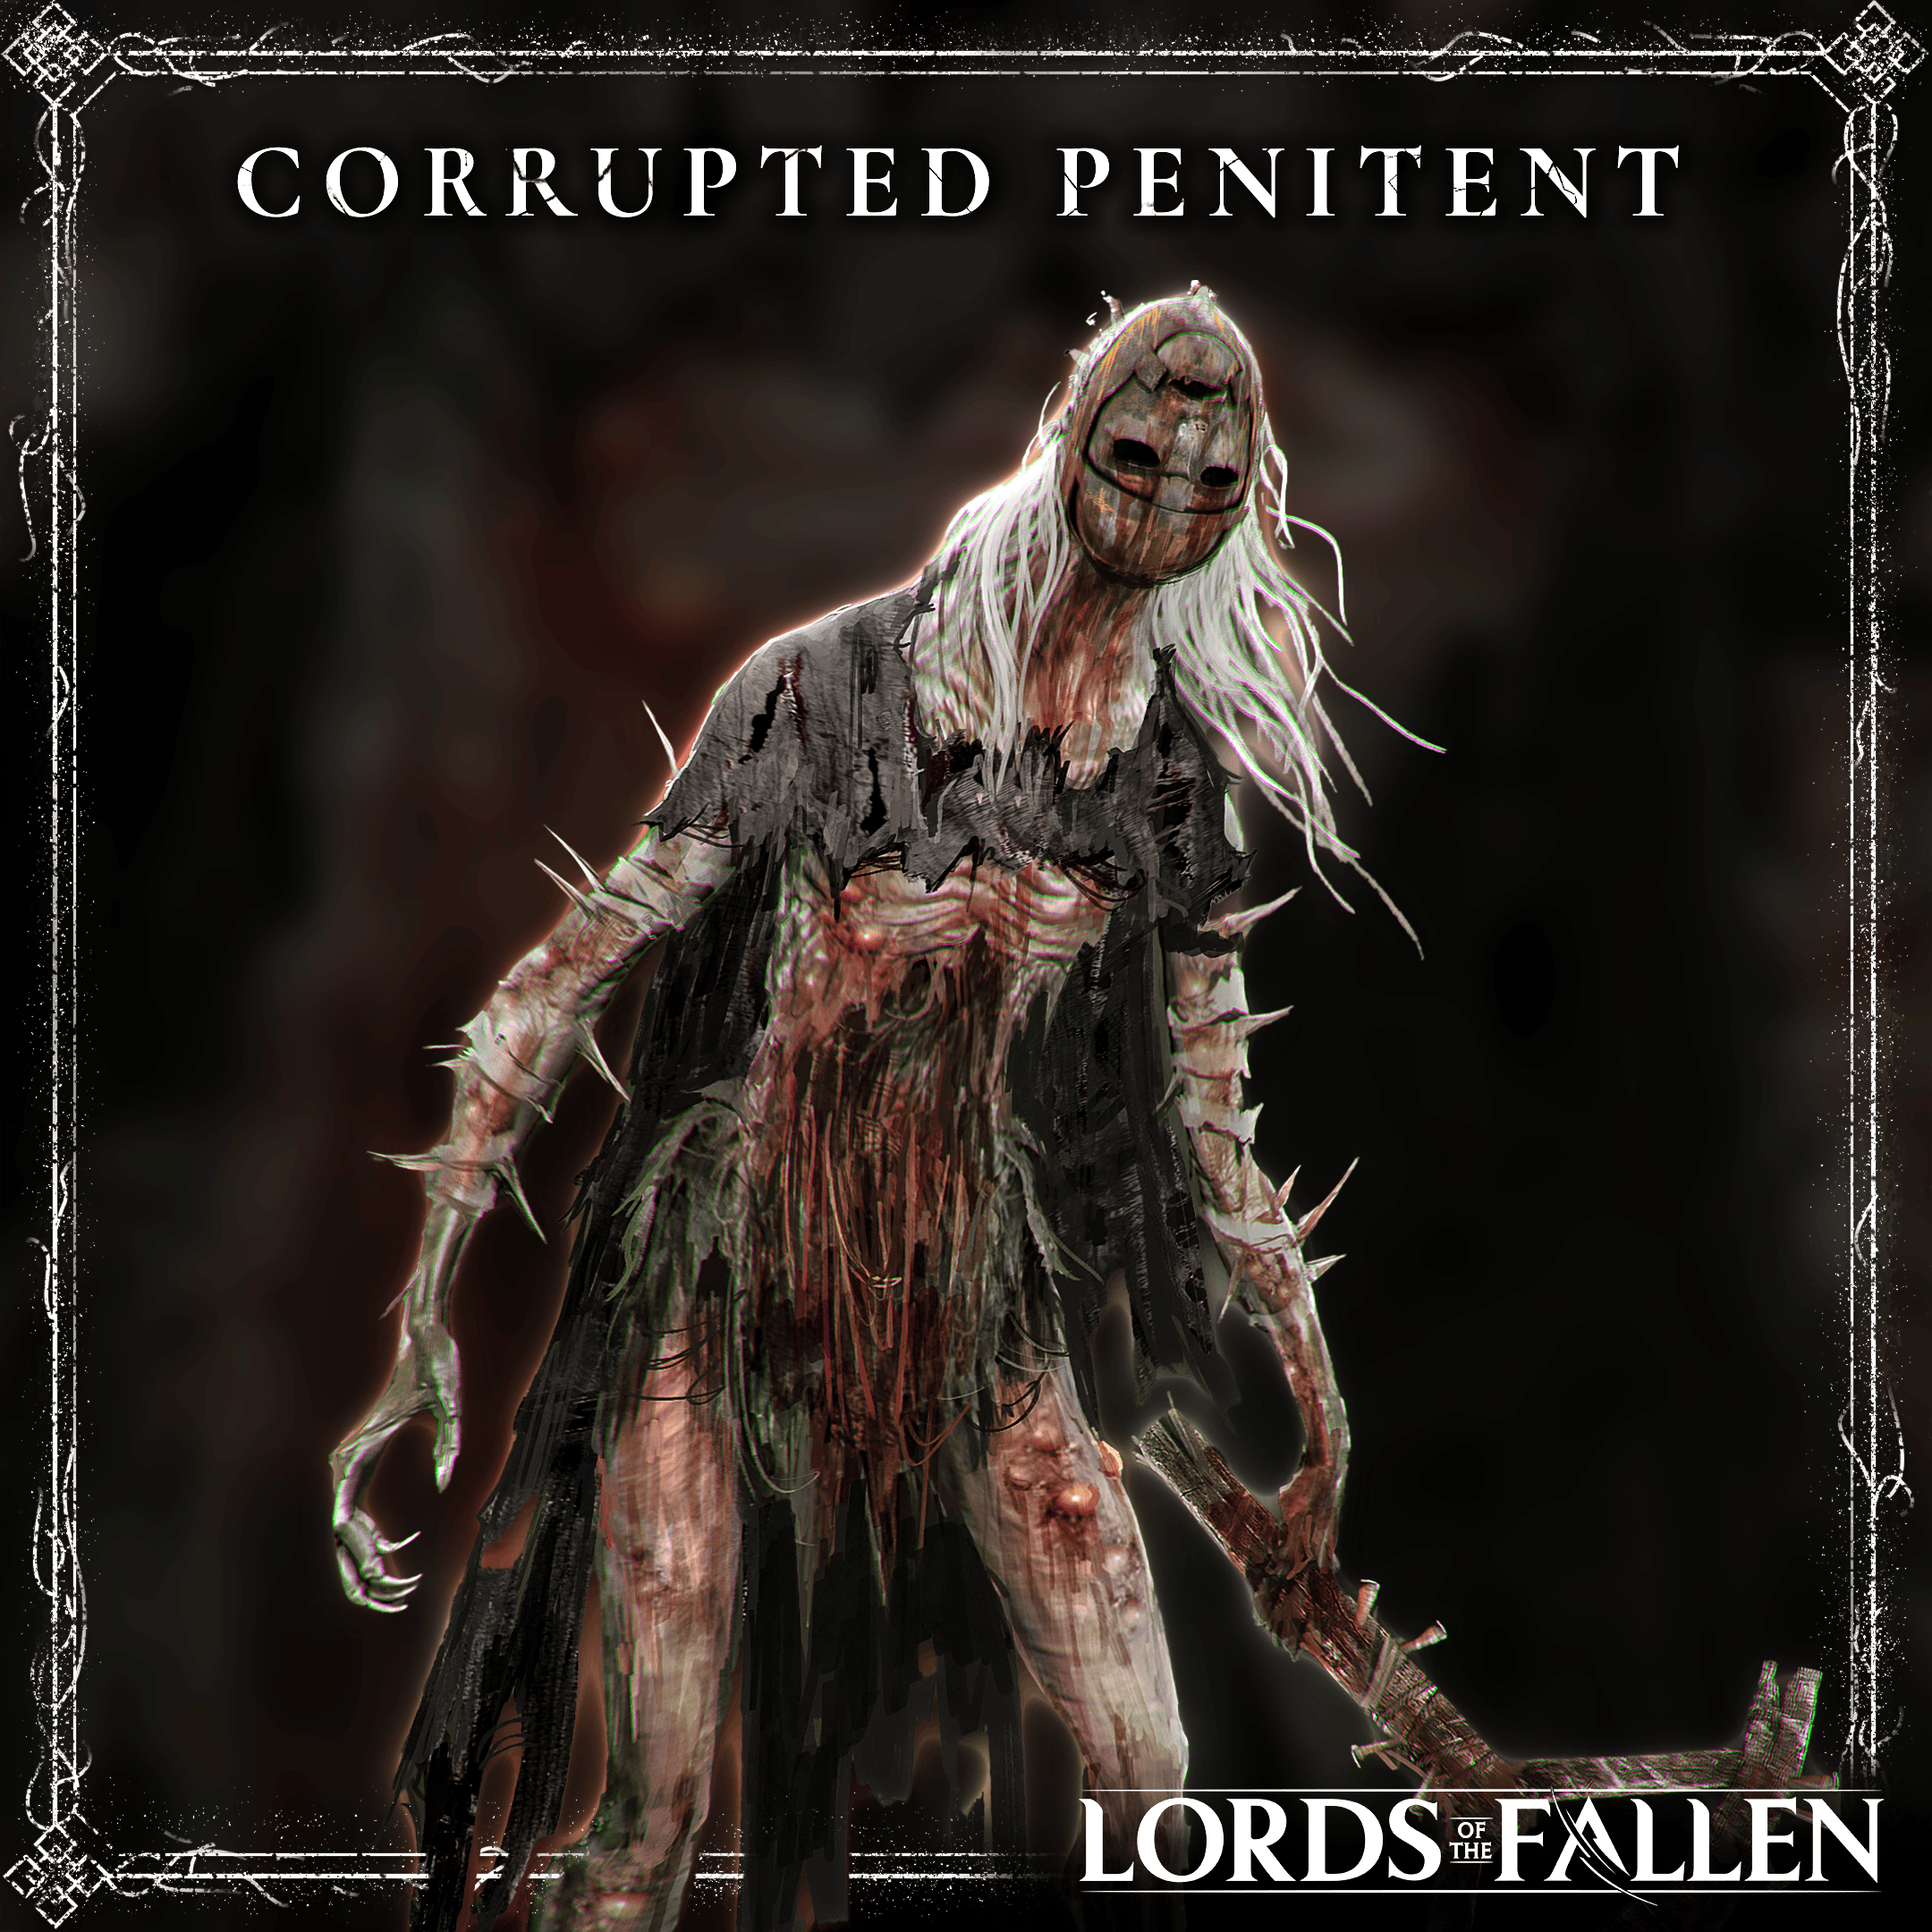 lords of the fallen corrupted penitent